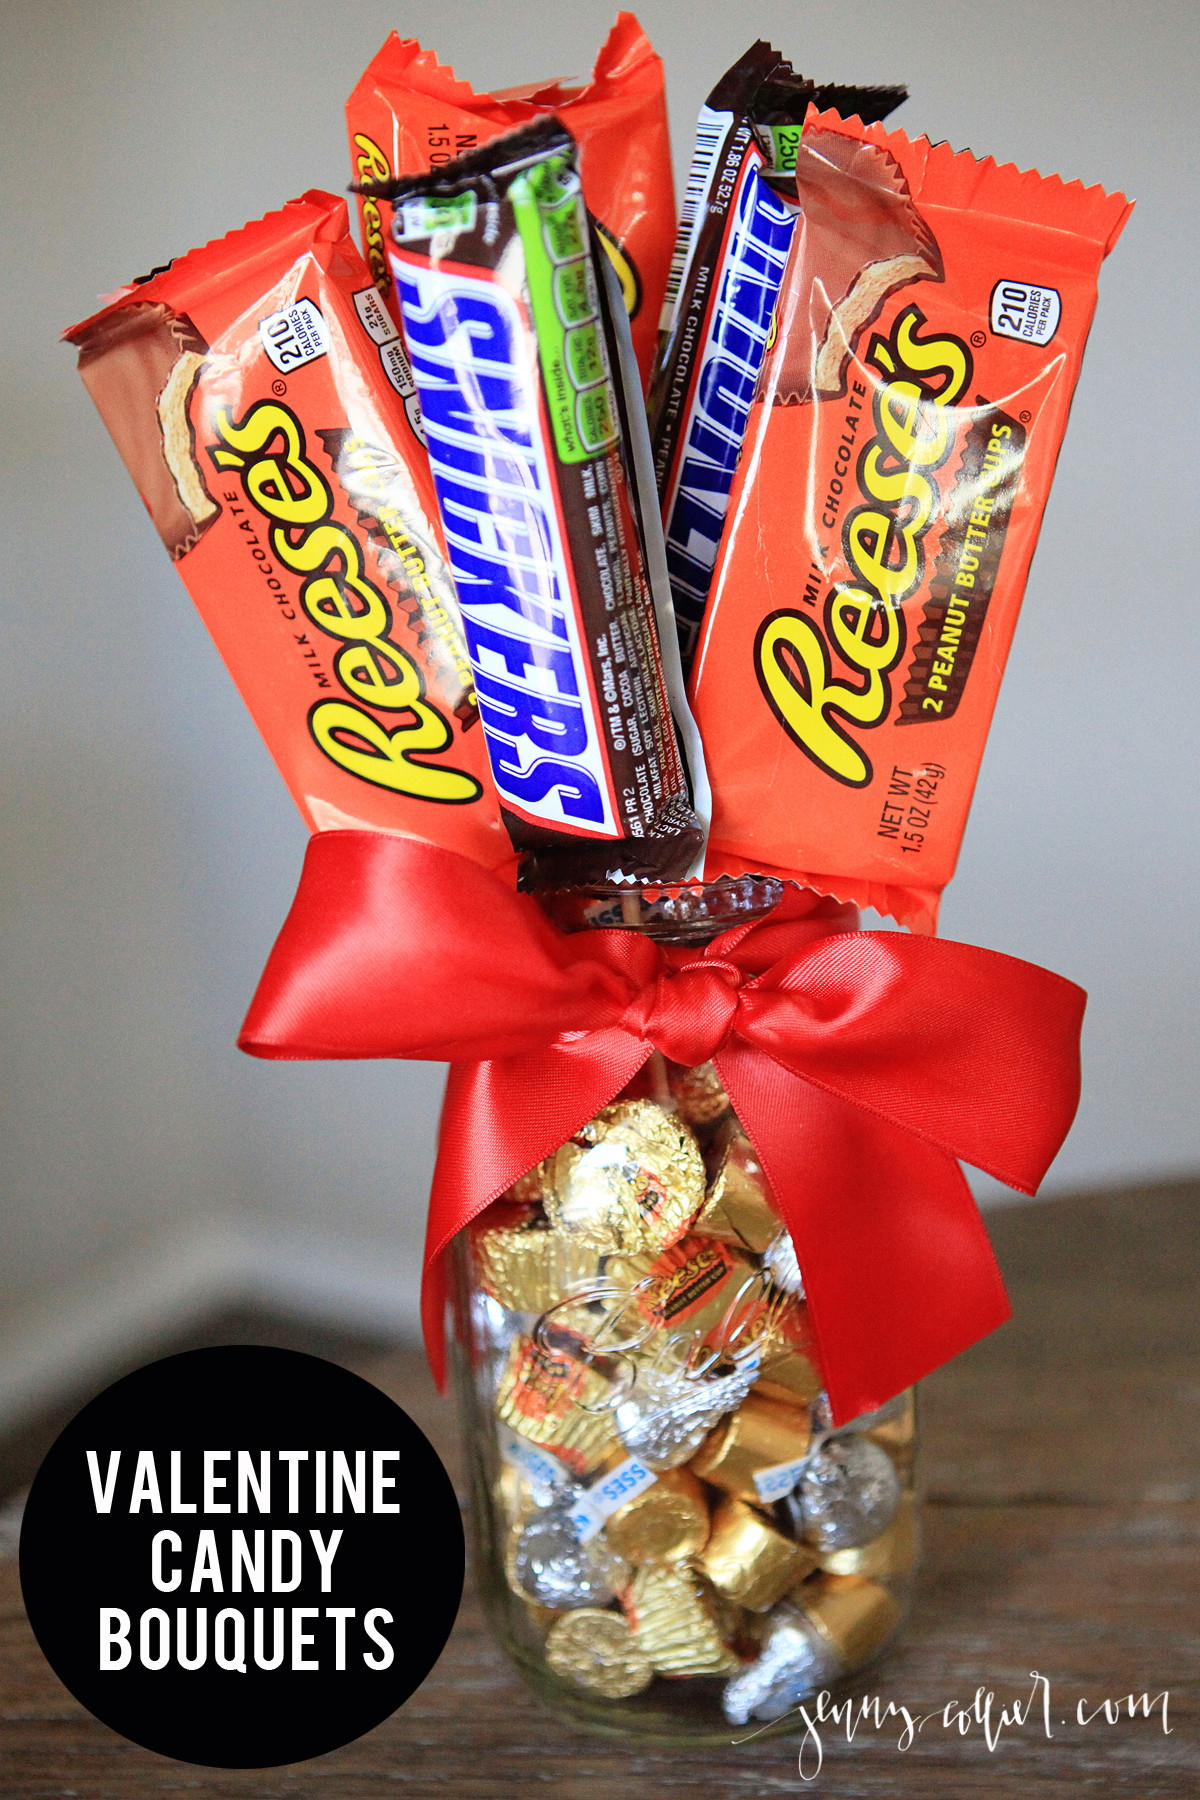 Valentines Candy Gift Ideas
 Valentine Candy Bouquets jenny collier blog